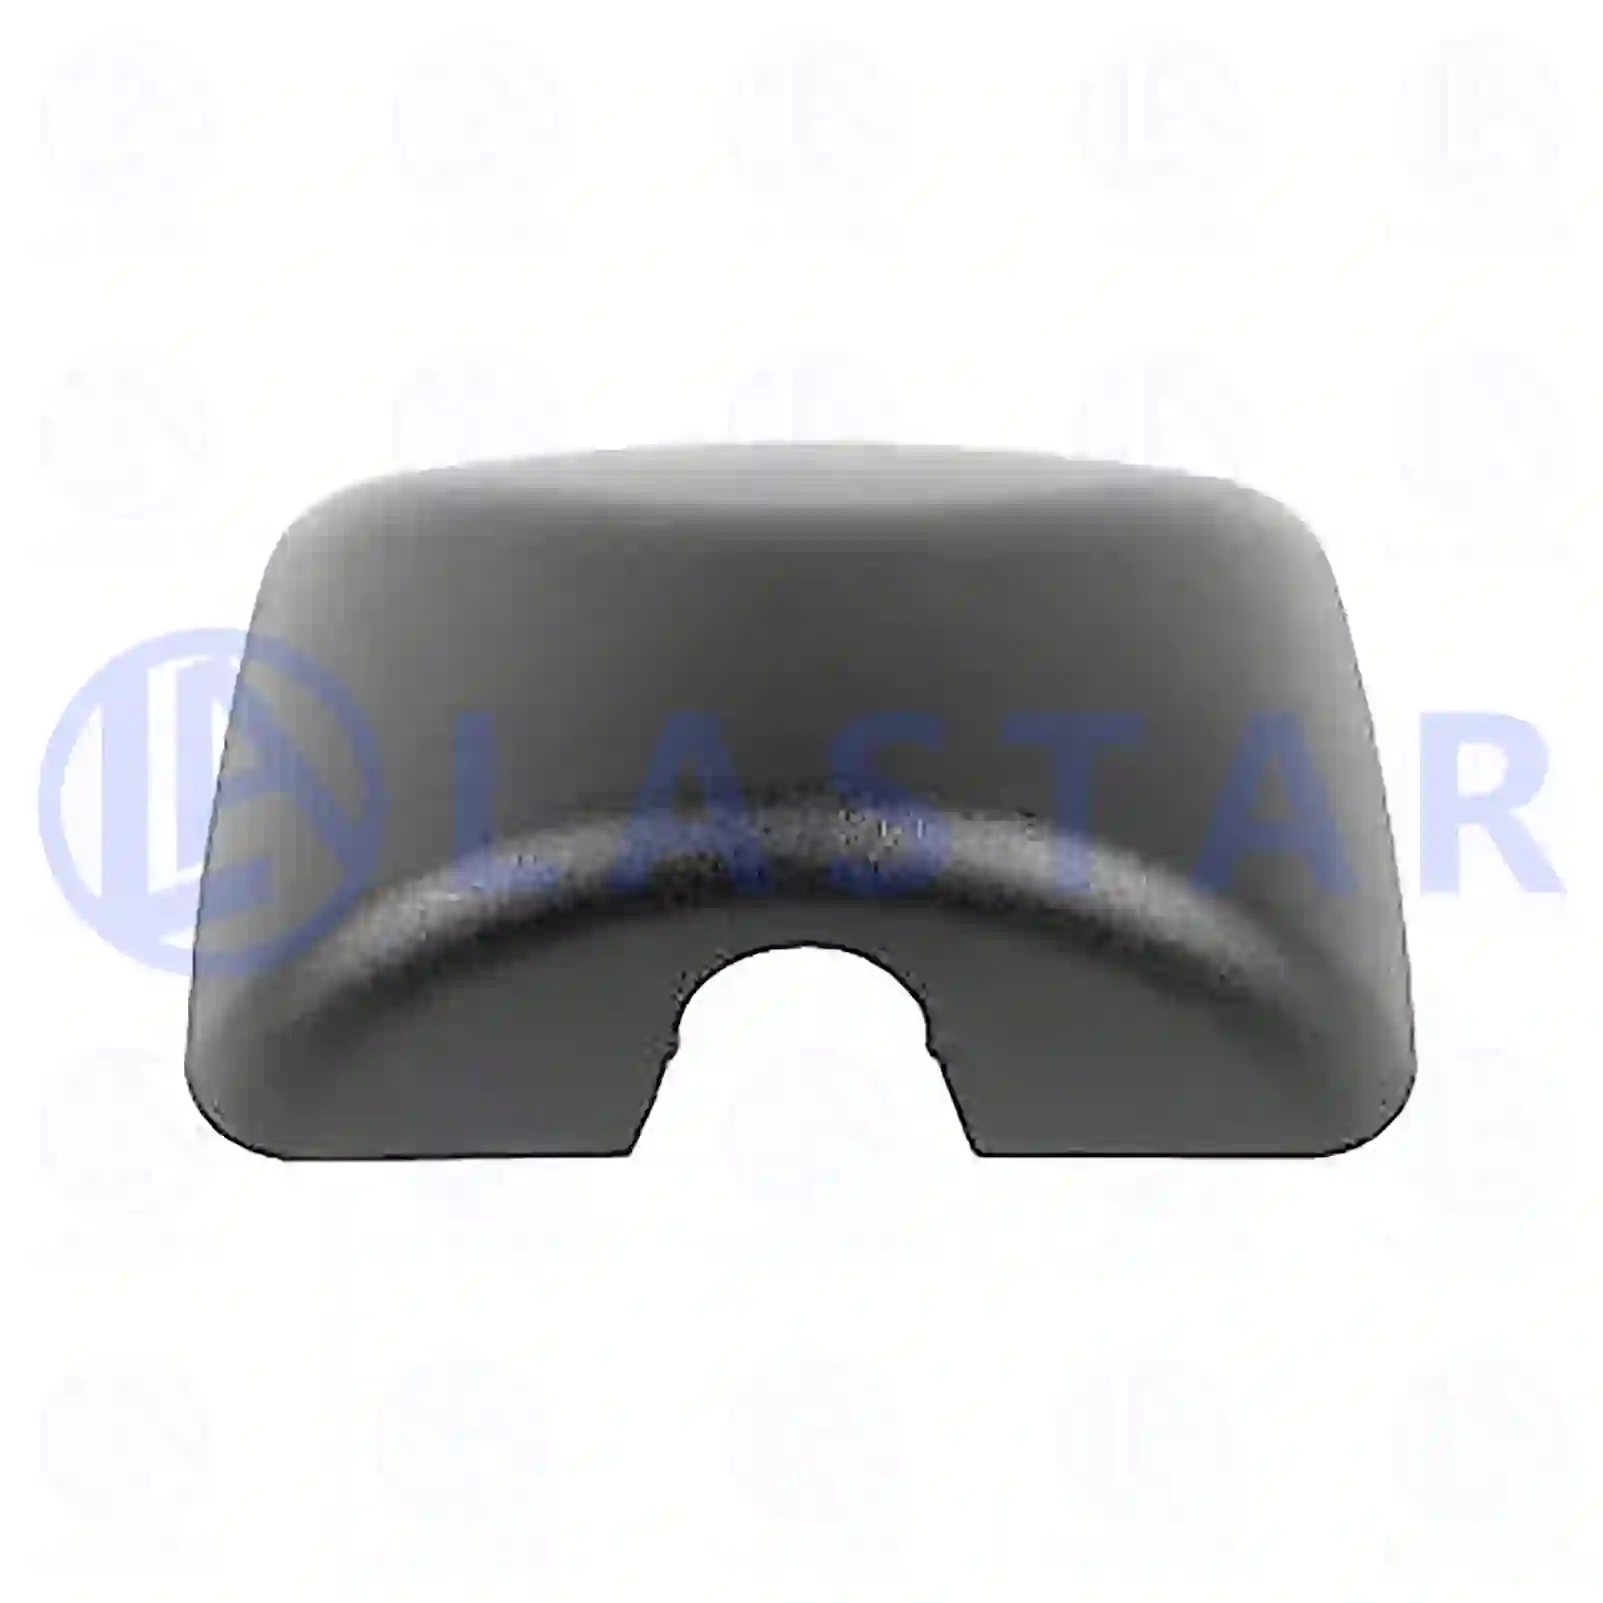 Cover, front mirror, 77719989, 1698180 ||  77719989 Lastar Spare Part | Truck Spare Parts, Auotomotive Spare Parts Cover, front mirror, 77719989, 1698180 ||  77719989 Lastar Spare Part | Truck Spare Parts, Auotomotive Spare Parts